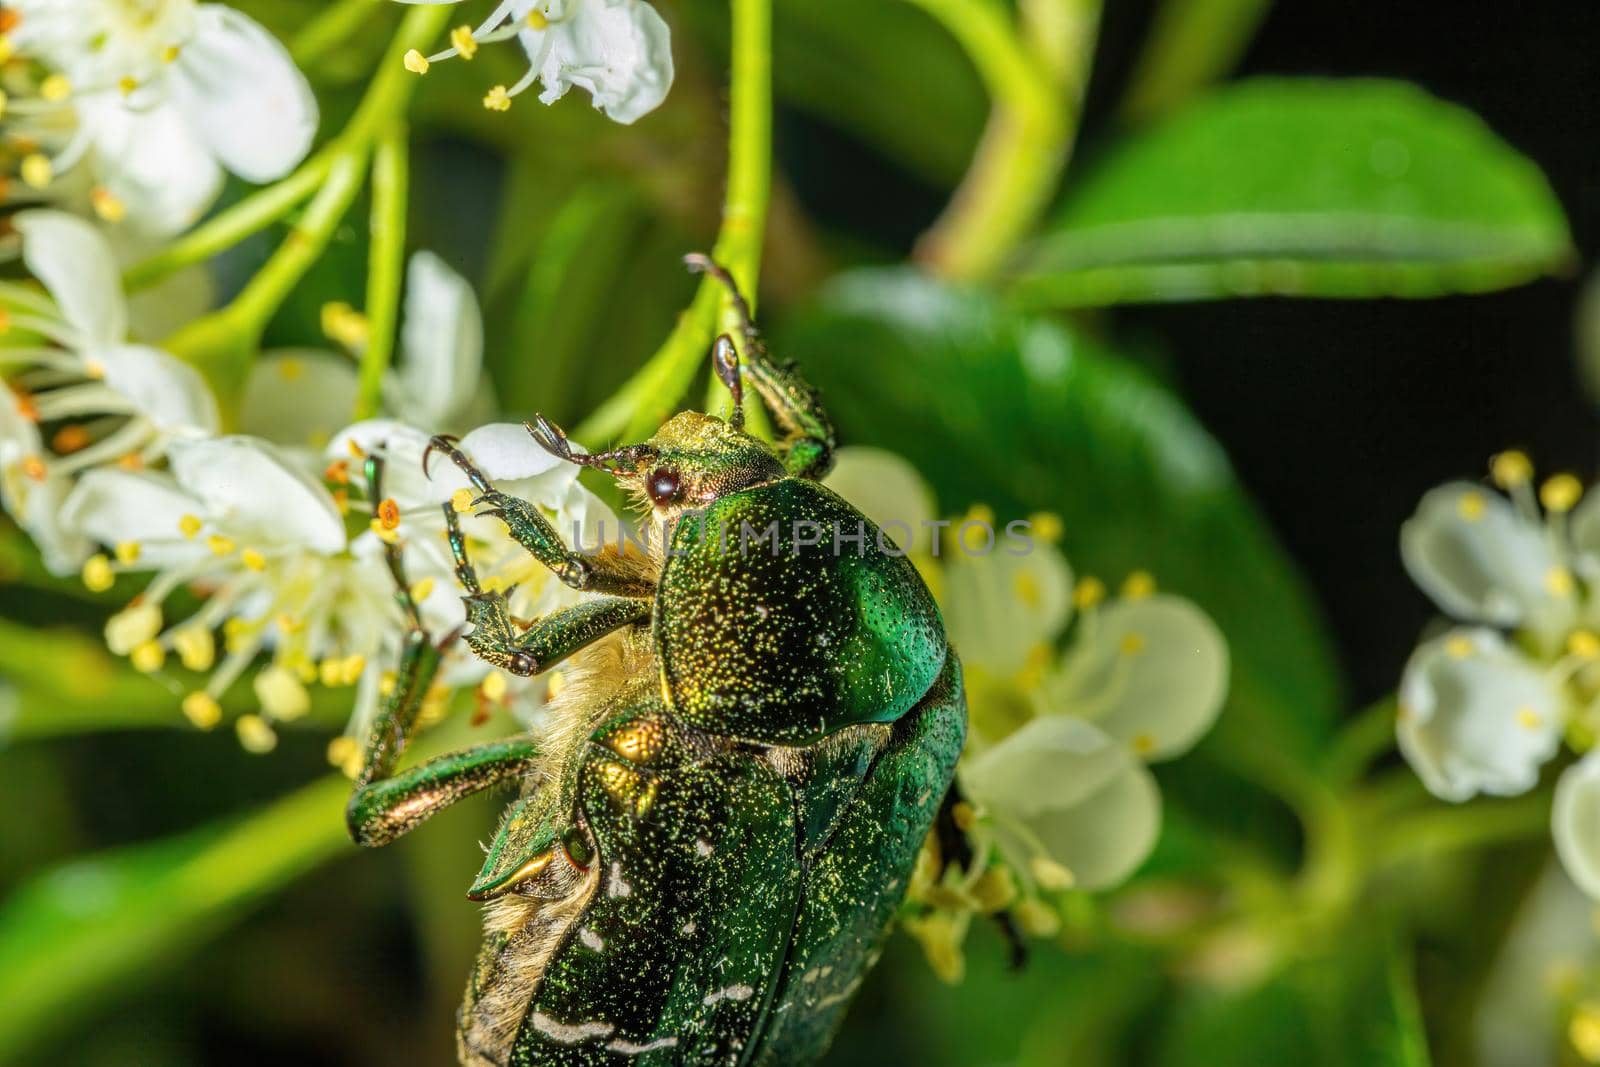 Big green bug collect pollen on a white flower in garden. Close-up macro view